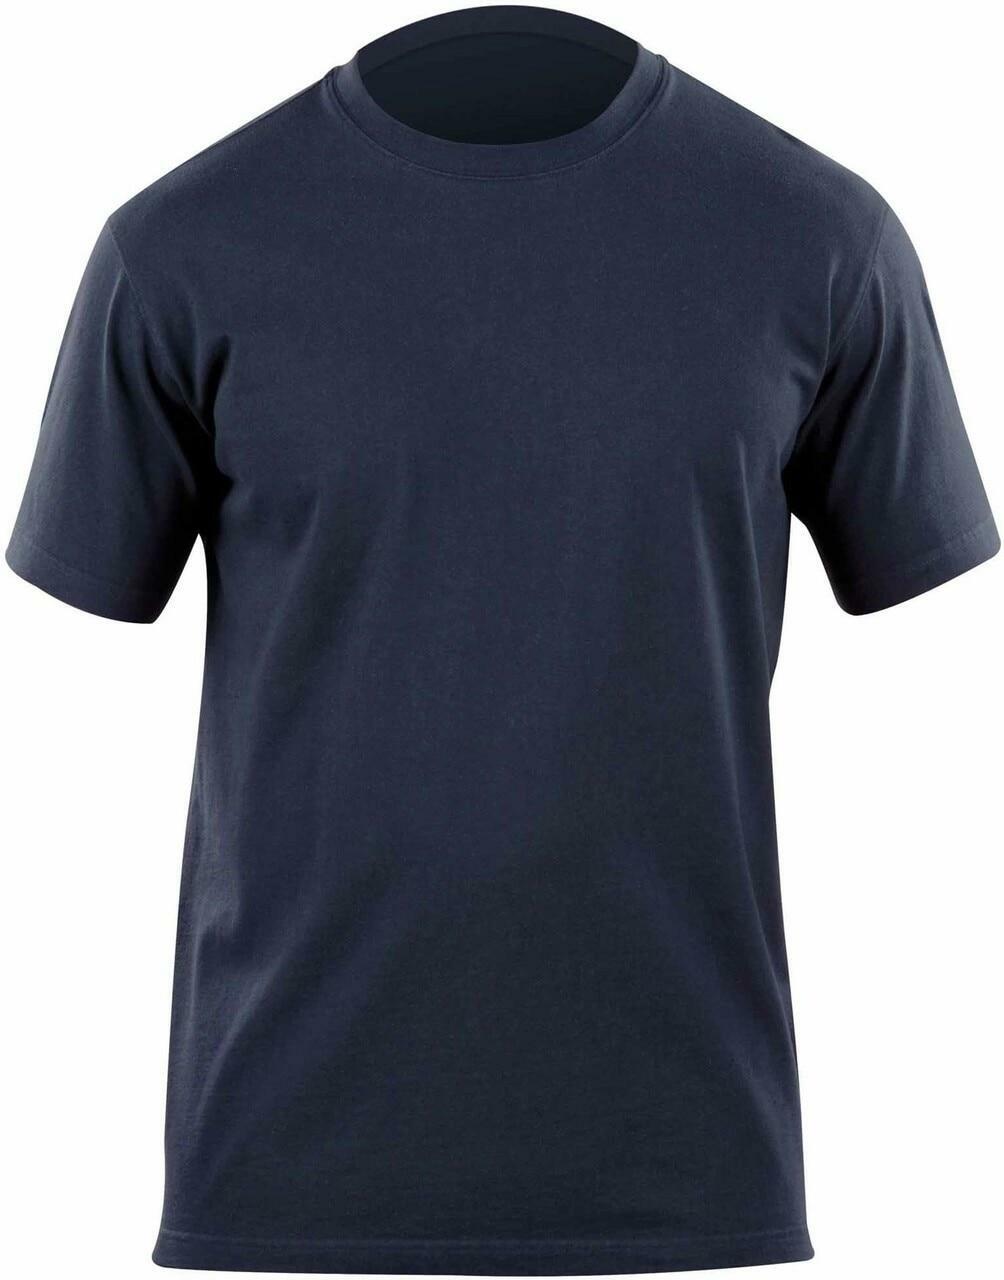 5.11 Tactical Professional Short Sleeve T-Shirt (71309) | The Fire Center | The Fire Store | Store | Fuego Fire Center | Firefighter Gear | The Professional Short Sleeve Tee is designed to provide a superior fit and professional profile while retaining the easy wearability and comfort of a traditional t-shirt